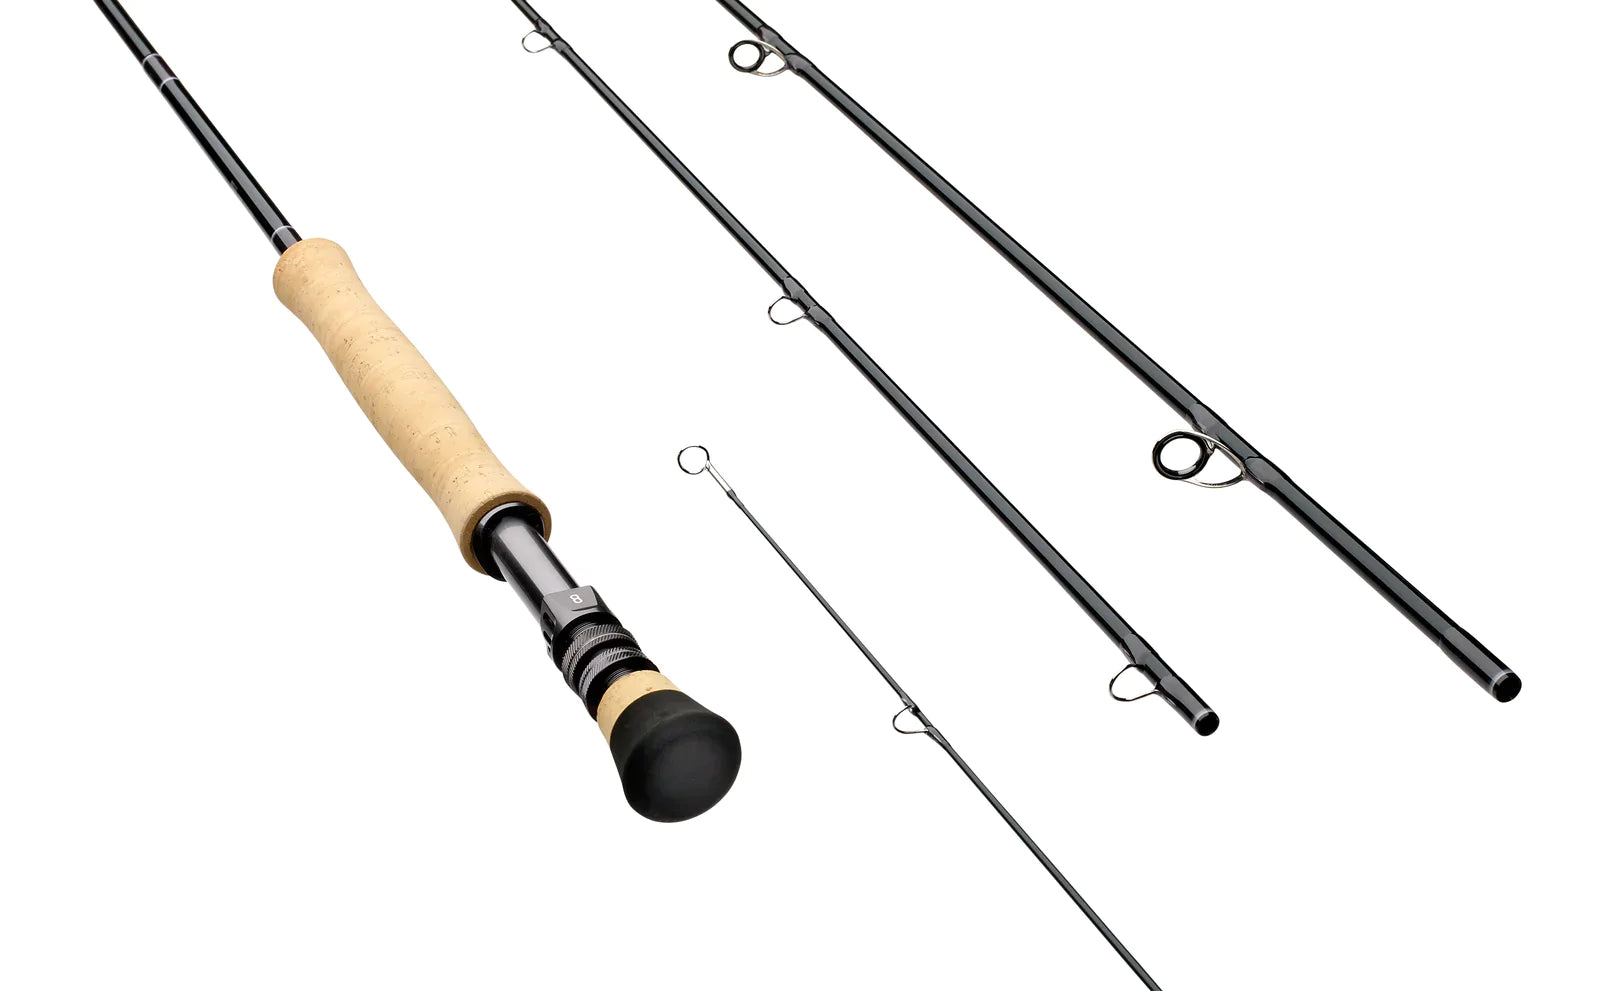 Sage SALT R8 7wt Light BONEFISH Saltwater Fly Rod Combo Outfit - NEW!